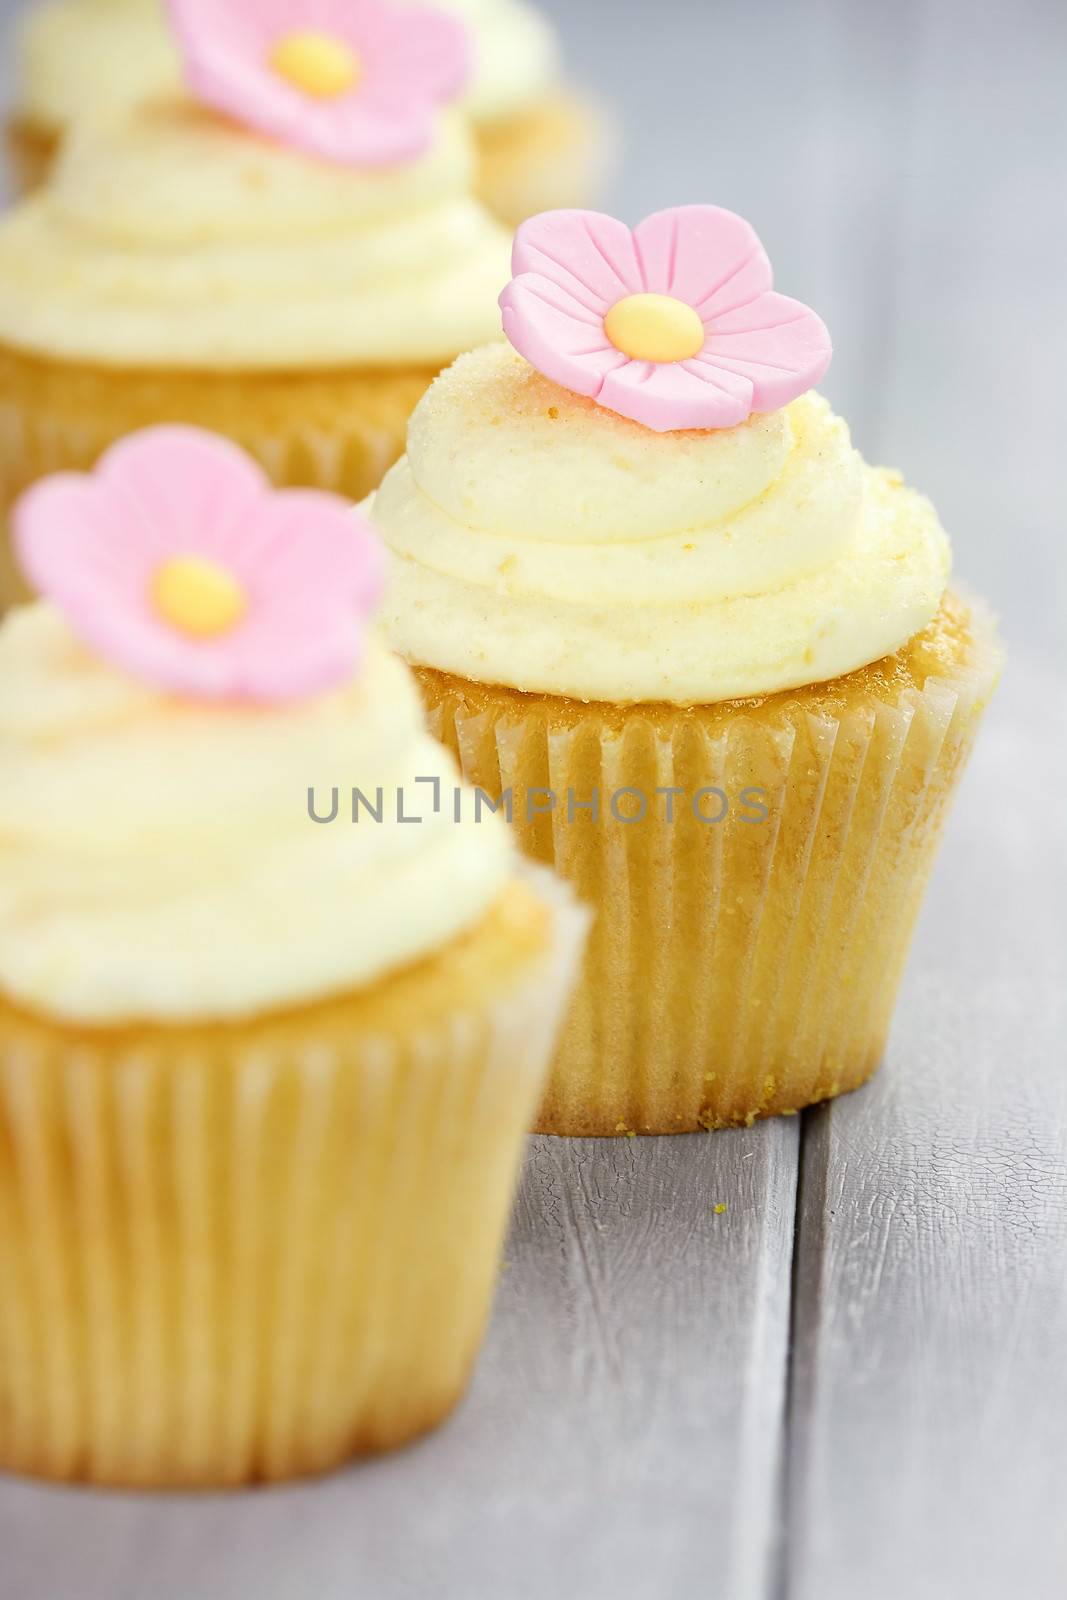 Pretty yellow and pink cupcakes with extreme shallow depth of field and selective focus on center cupcake.